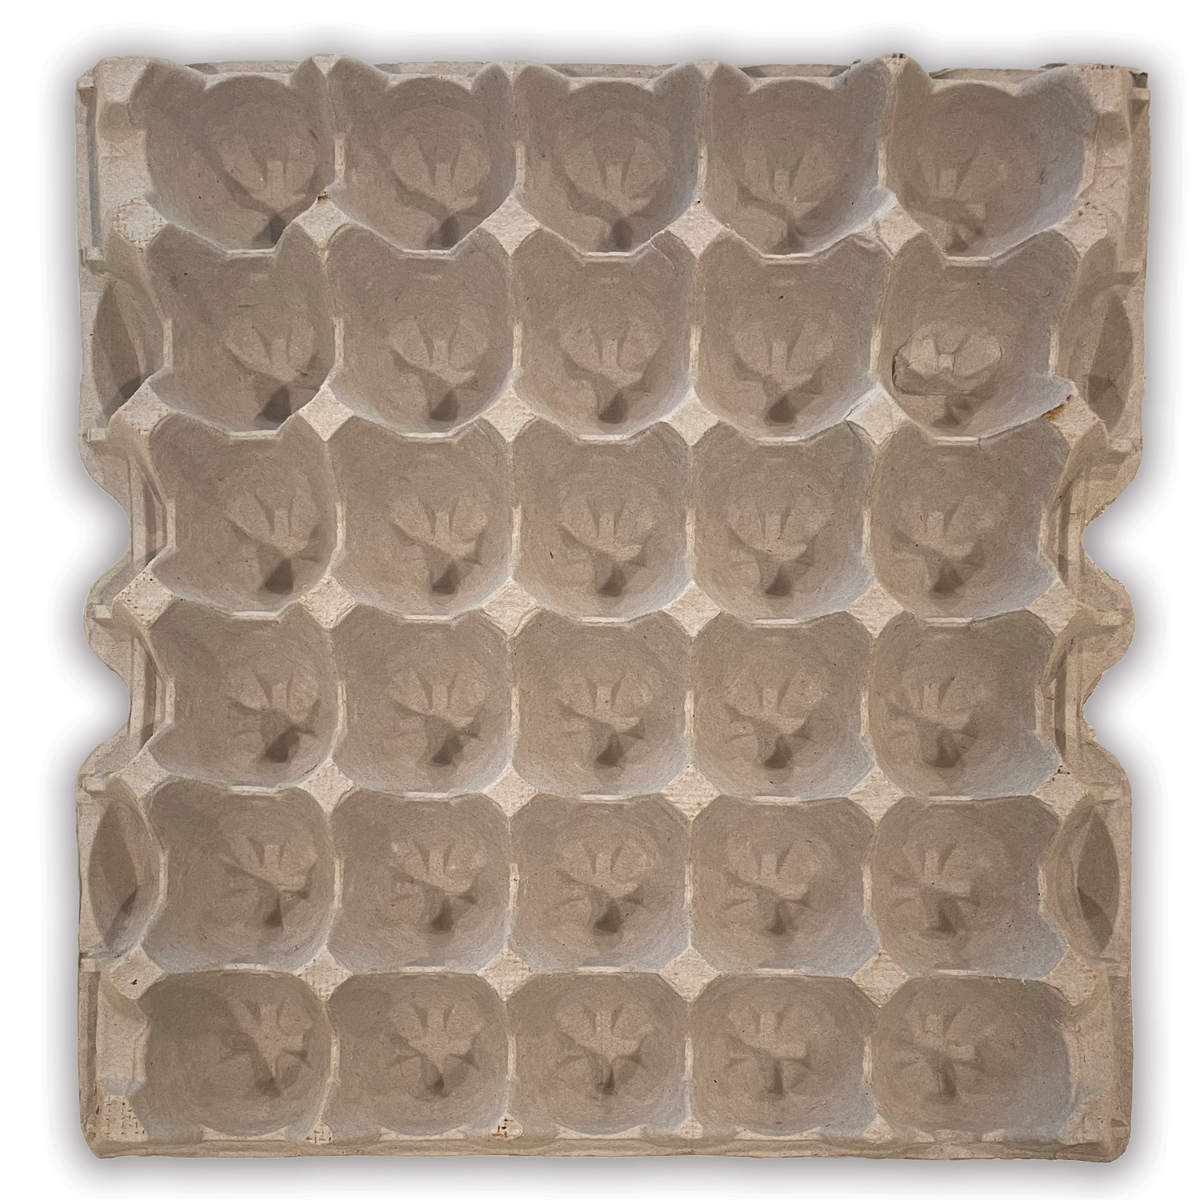 Egg Flat - Paper Pulp 36 Cell Egg Tray –